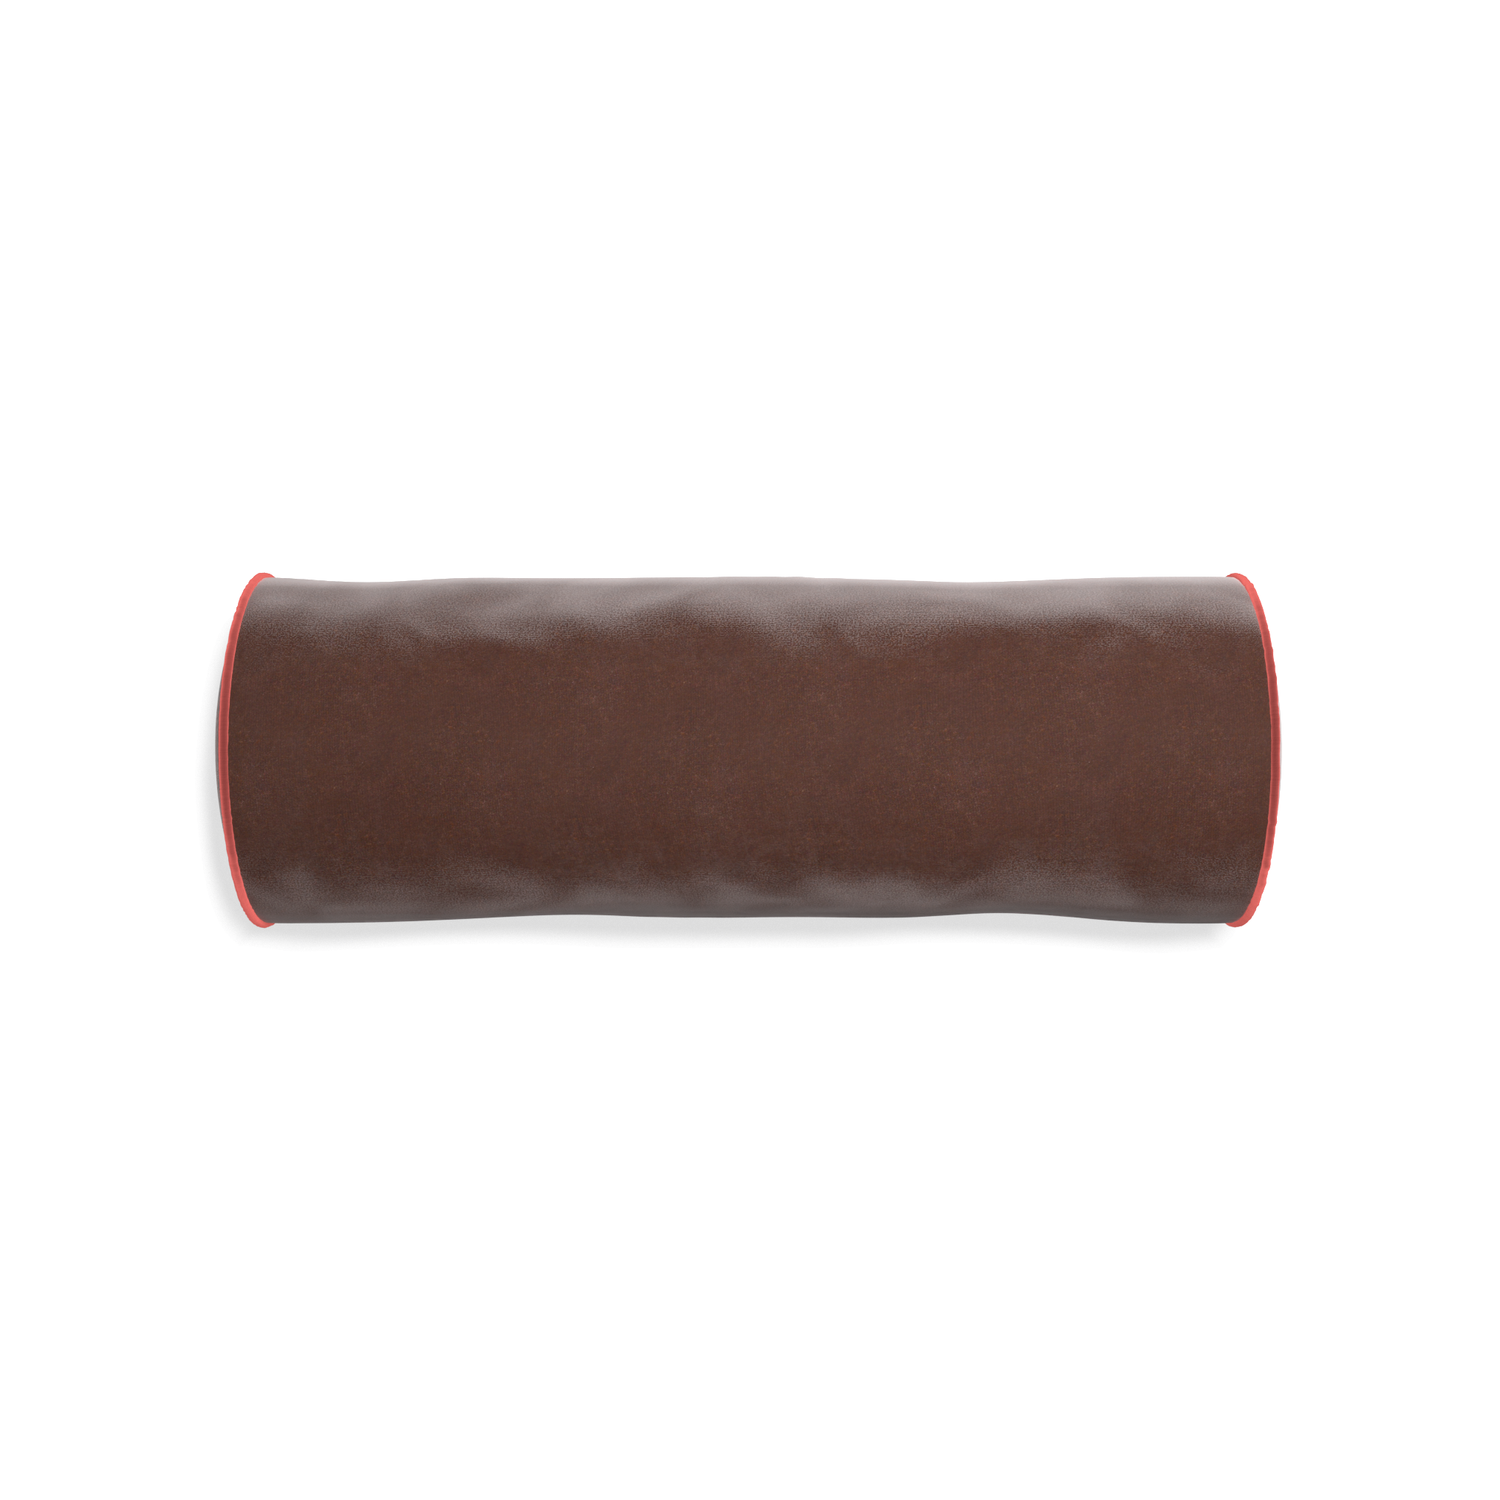 bolster brown velvet pillow with coral piping